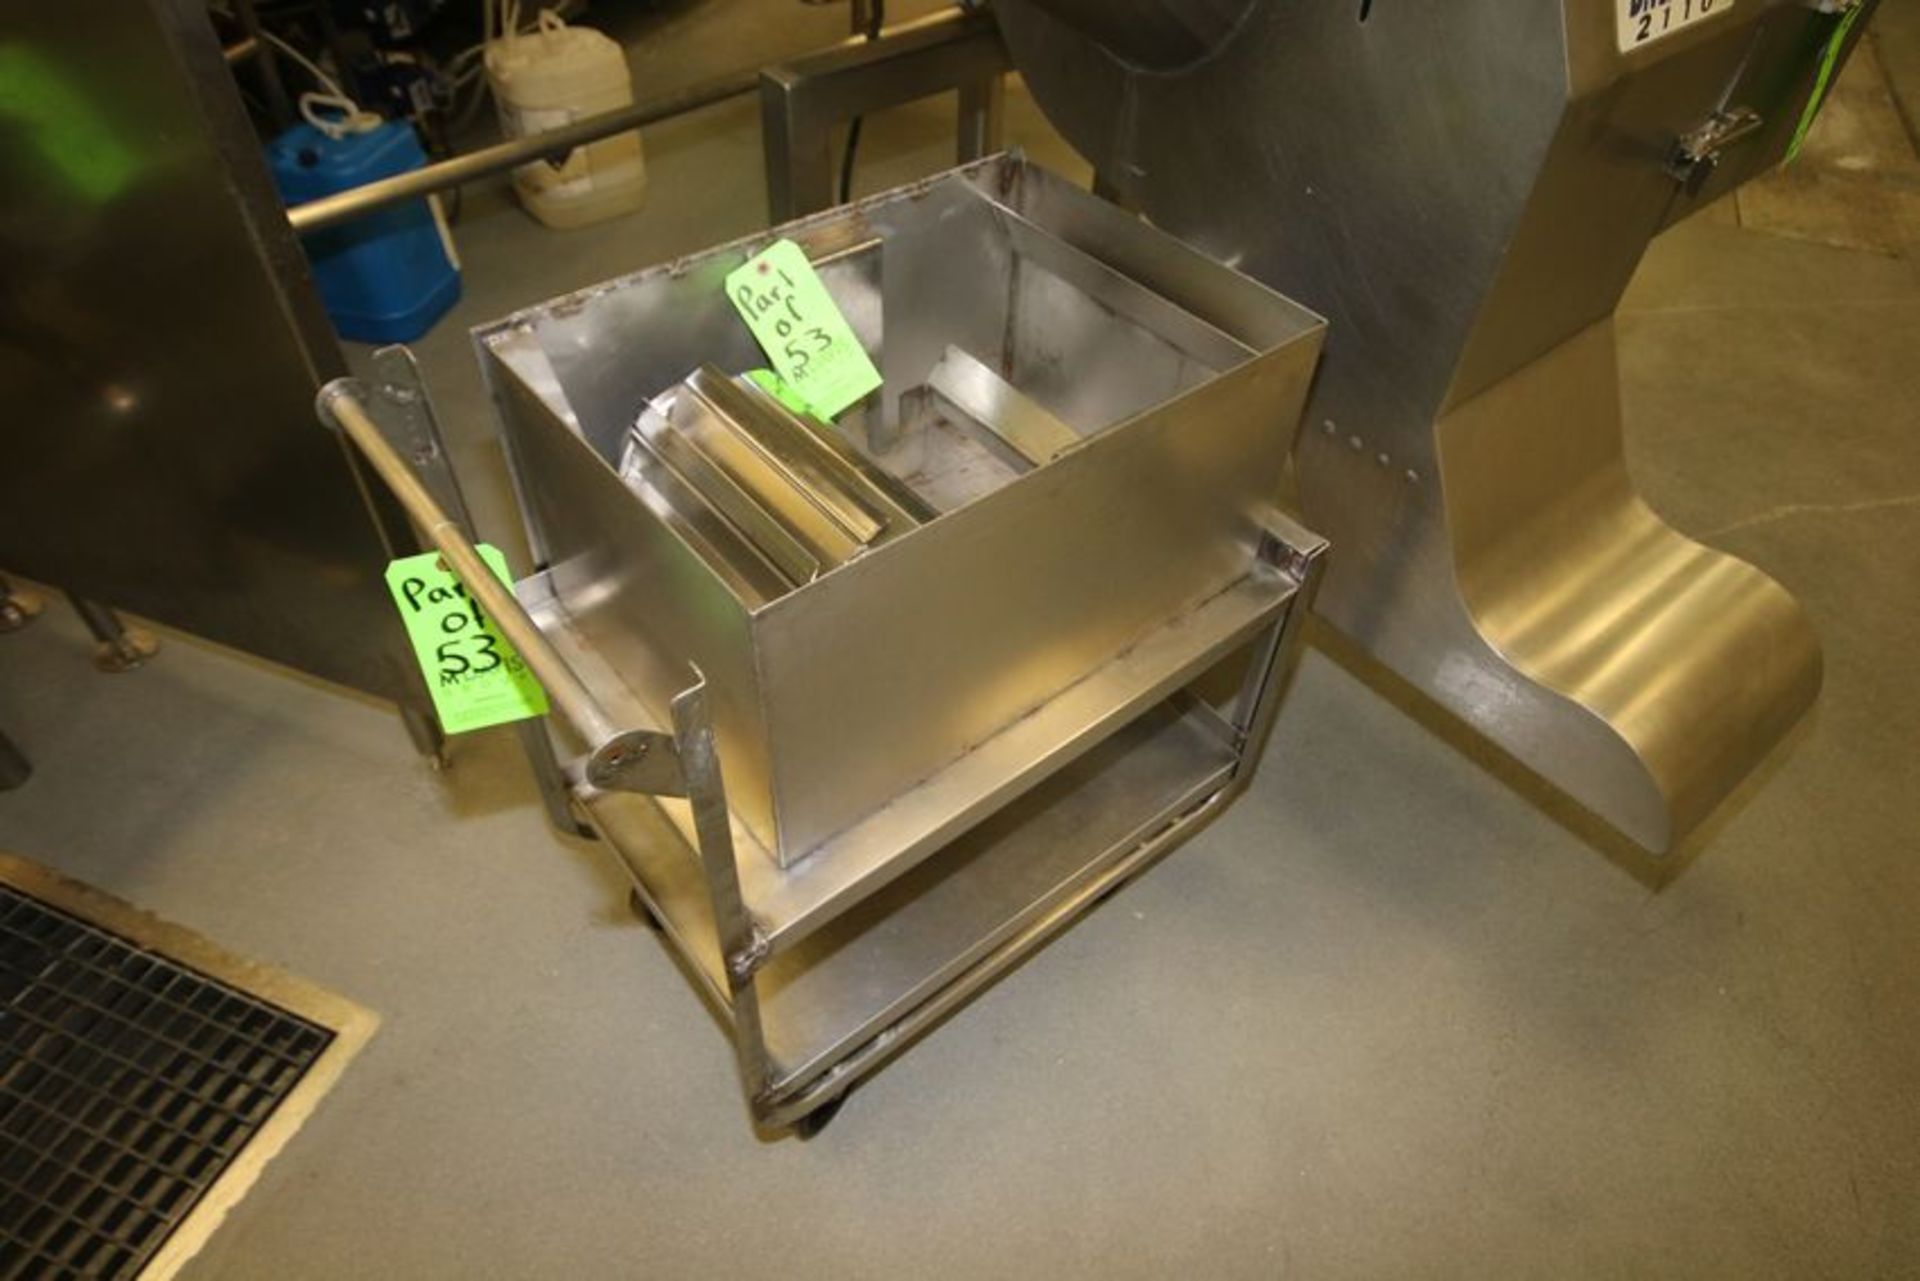 Urschel Diversa Cut 2110 Dicer, Model DC, S/N 174 with S/S Clad Motor, Controls, Mounted on S/S - Image 7 of 12